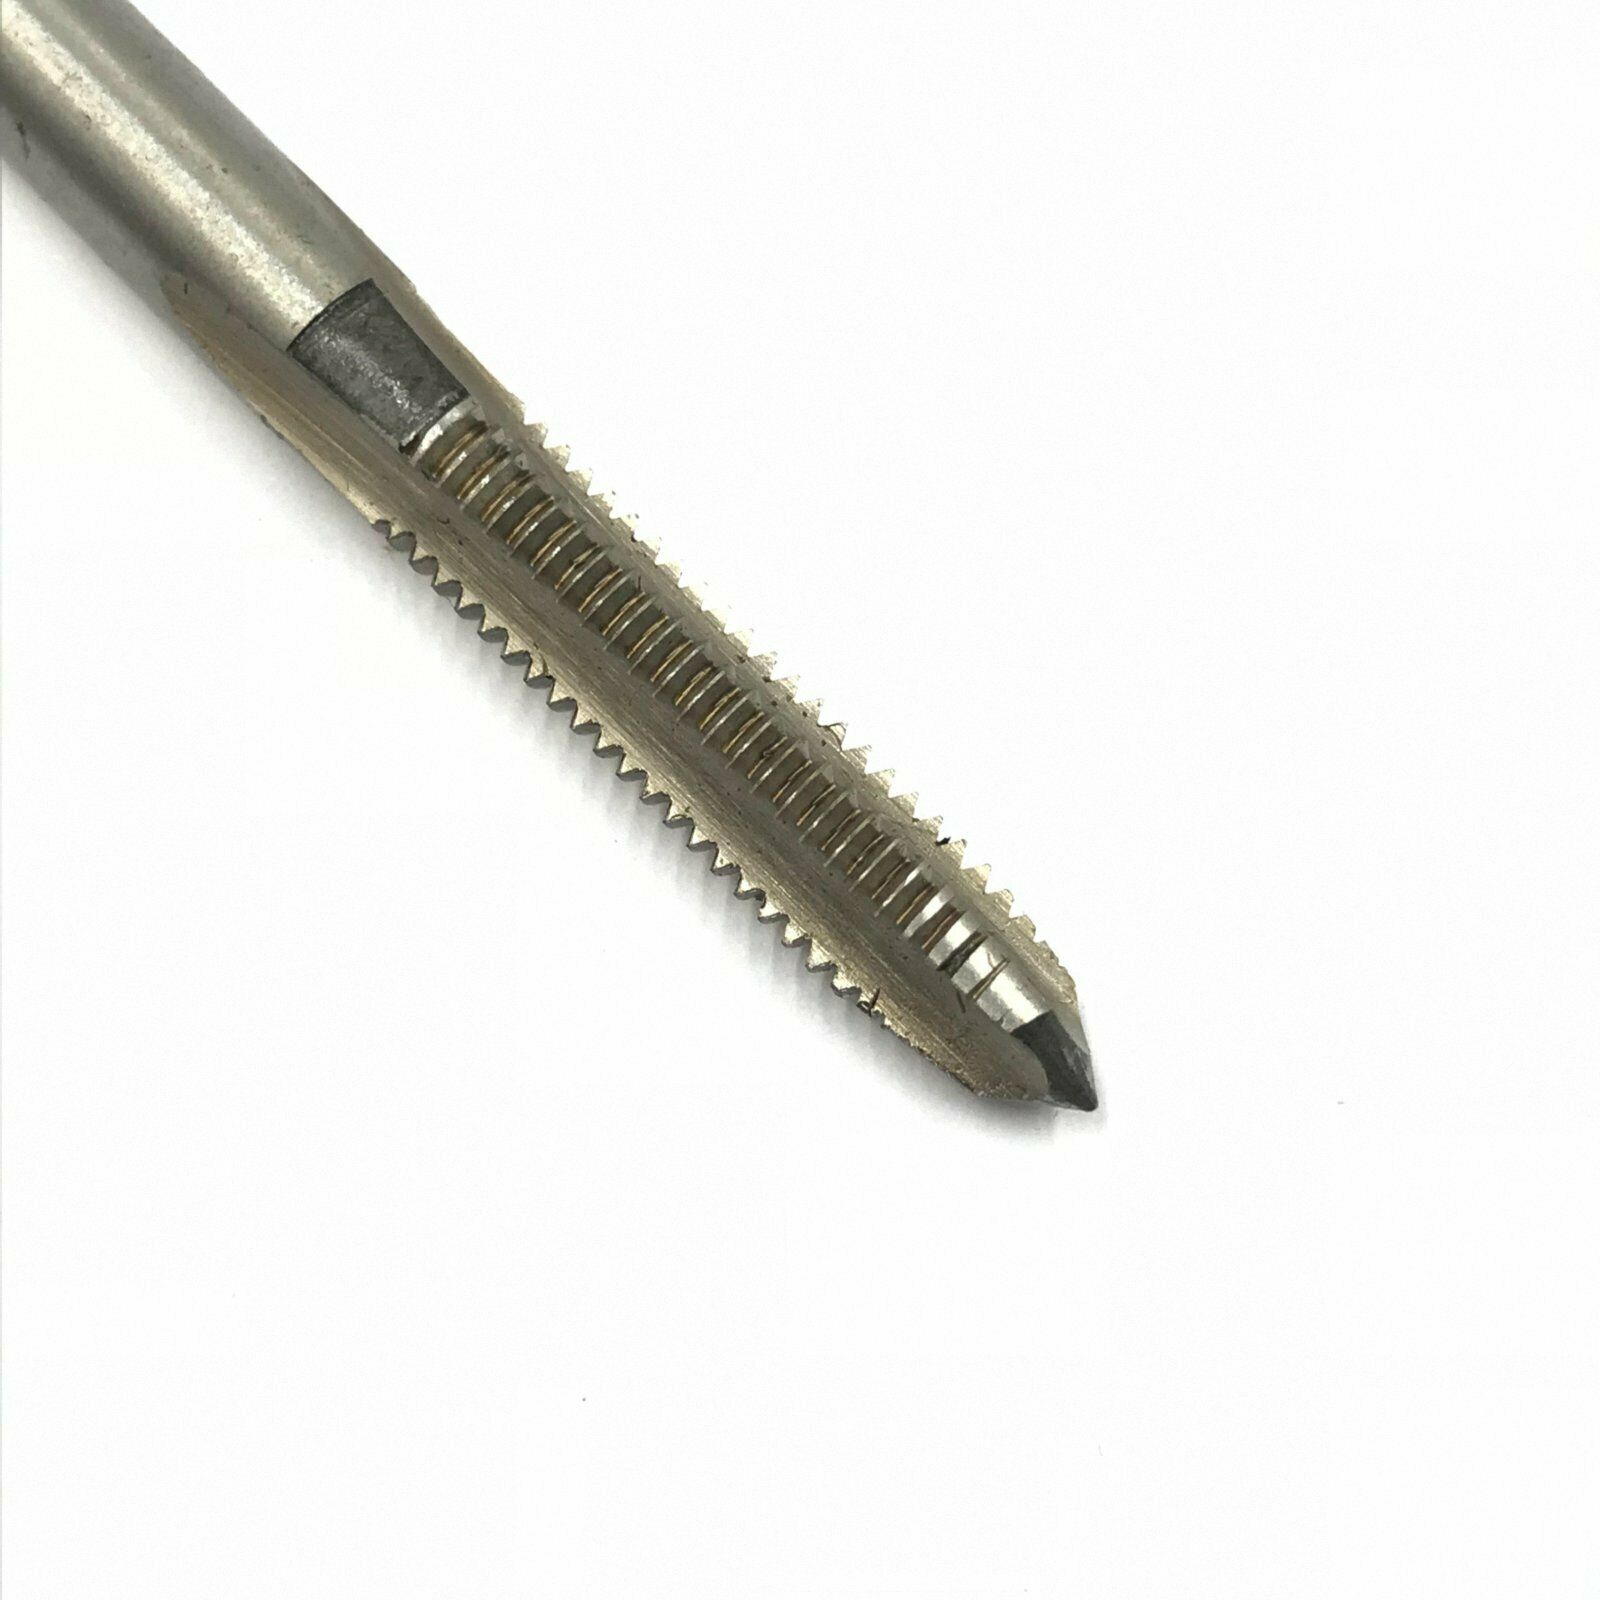 1 of M5 x 0.8mm Pitch Metric HSS Right hand Tap [M_M_S]